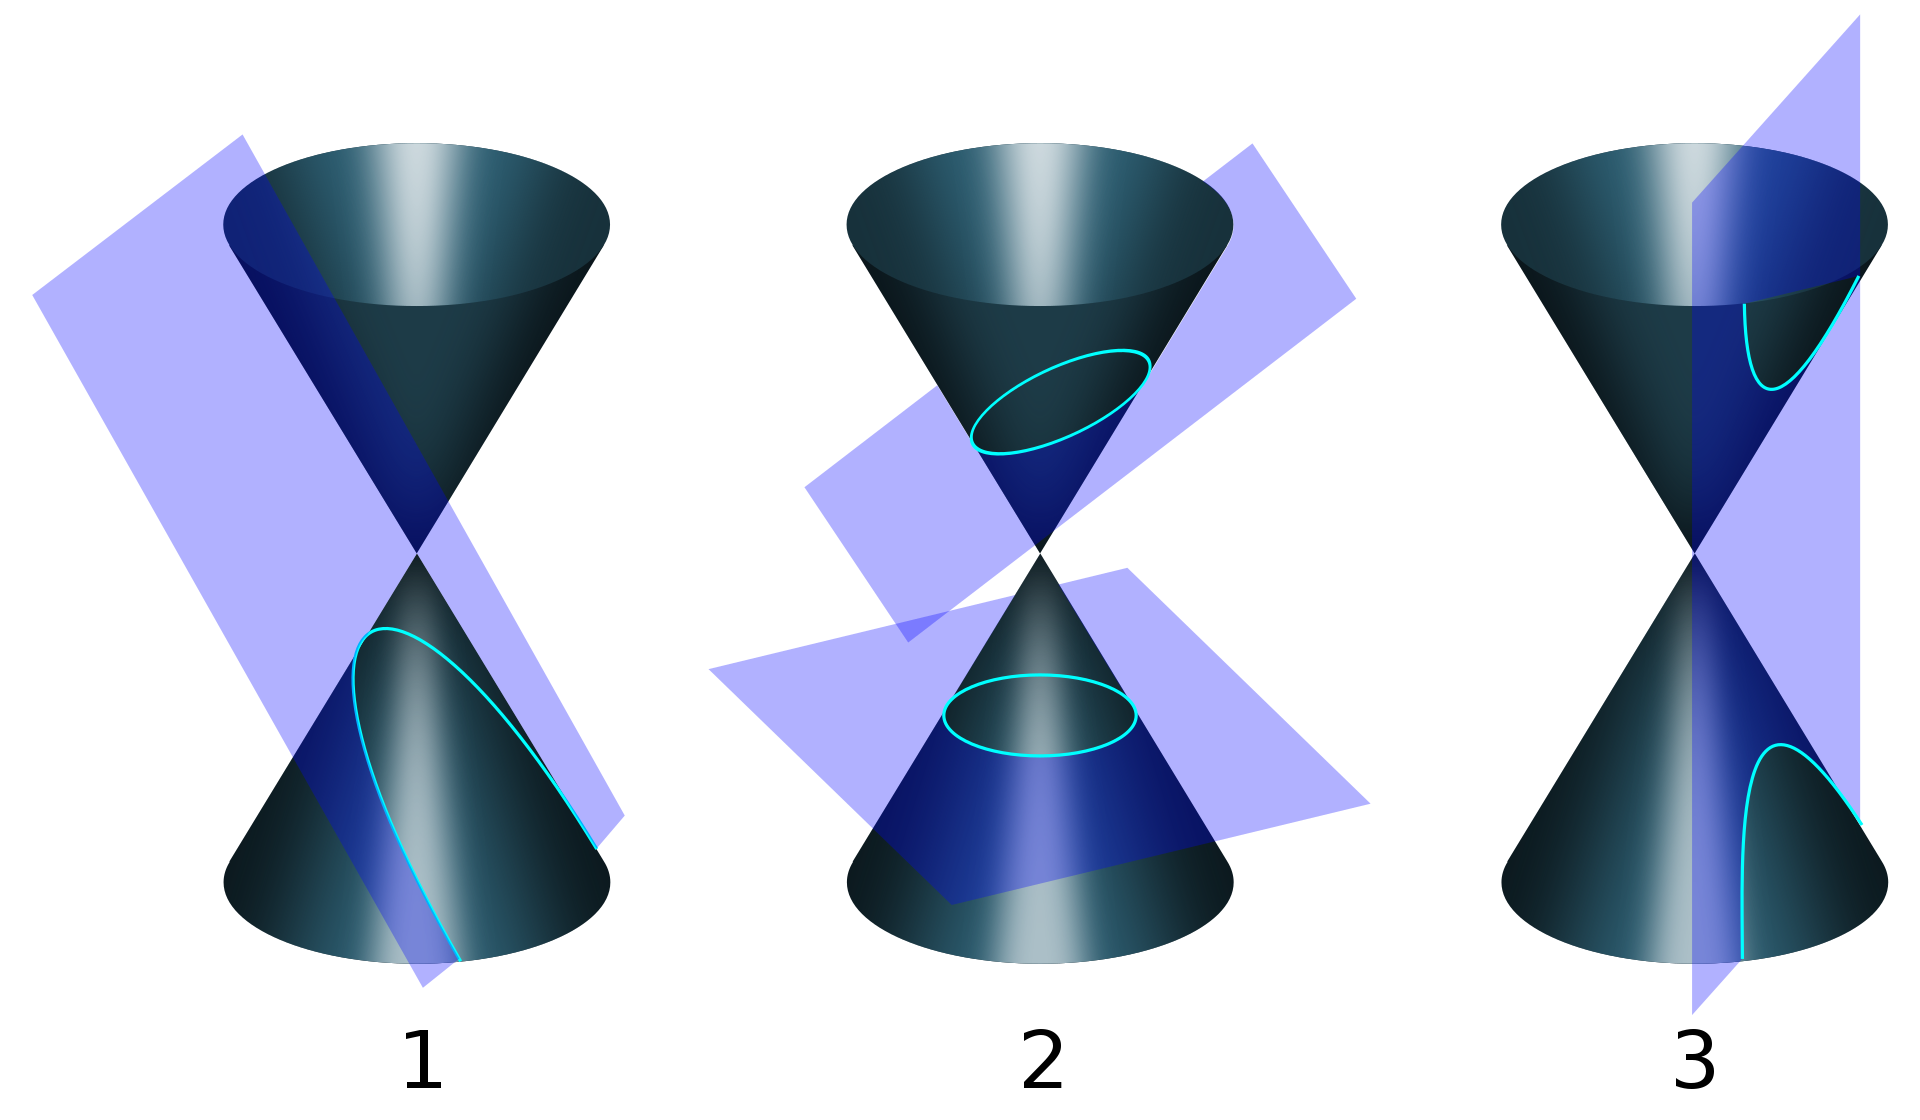 https://upload.wikimedia.org/wikipedia/commons/thumb/d/d3/Conic_sections_with_plane.svg/1920px-Conic_sections_with_plane.svg.png